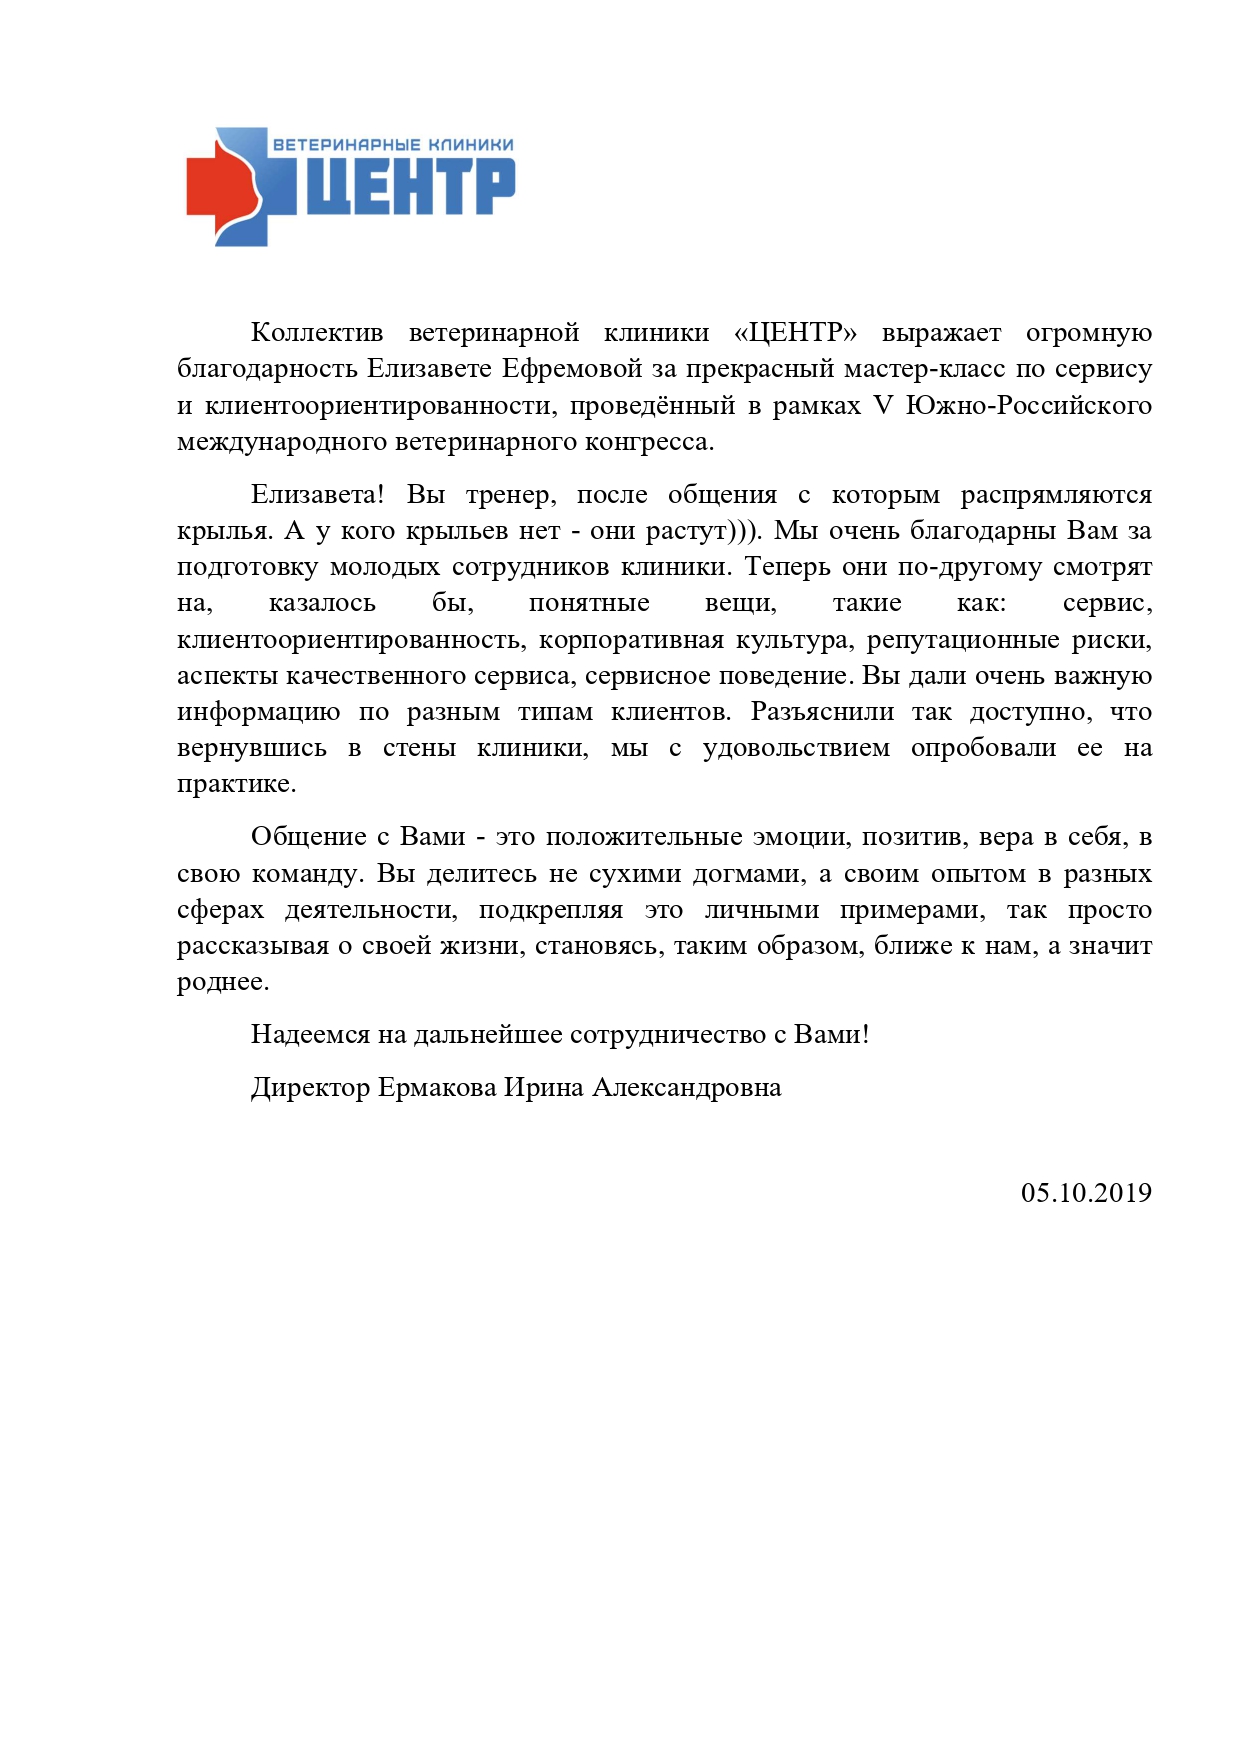 Центр 4_pages-to-jpg-0001.jpg